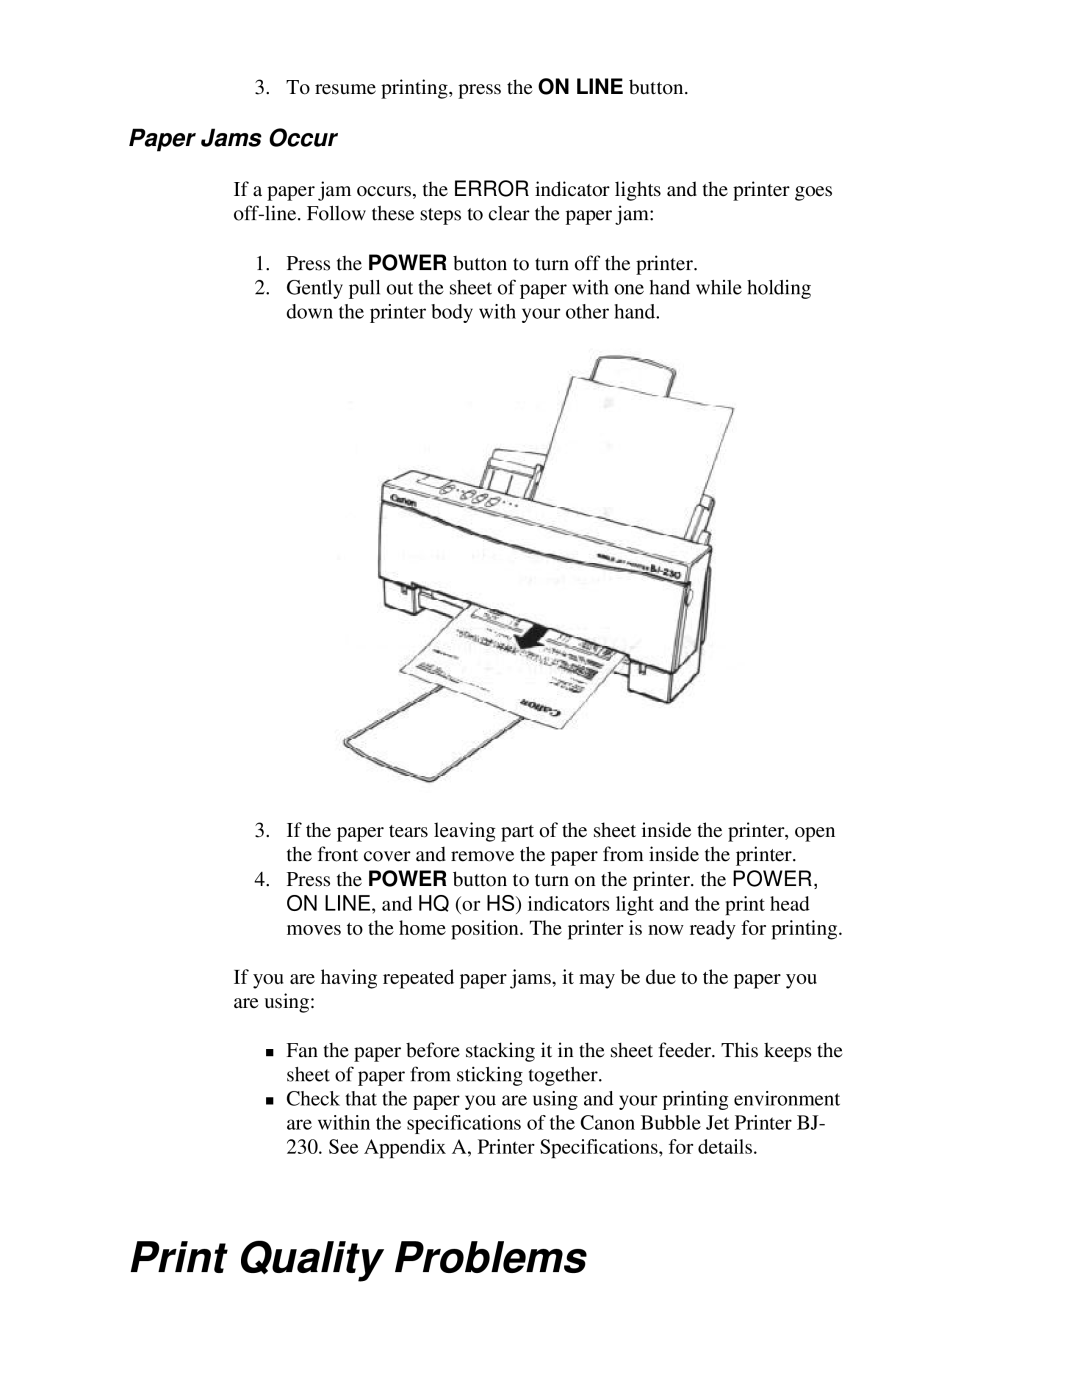 Canon BJ-230 user manual Print Quality Problems, Paper Jams Occur 